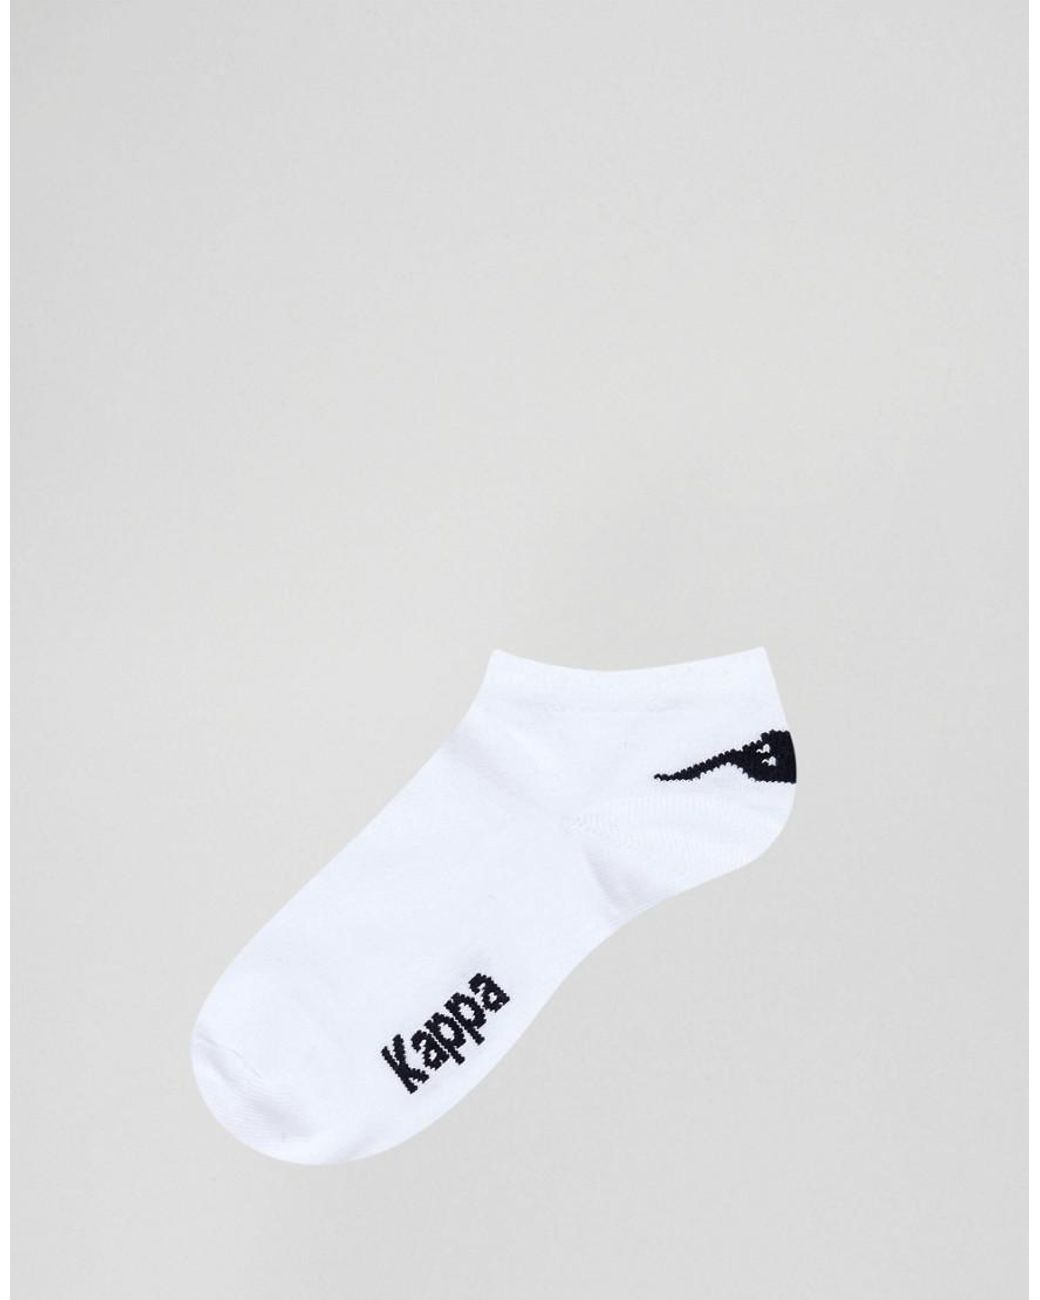 K004 Kappa 3 Pairs Of Socks Tights Woman Kappa Low Cotton with Logo Embroidered Art 